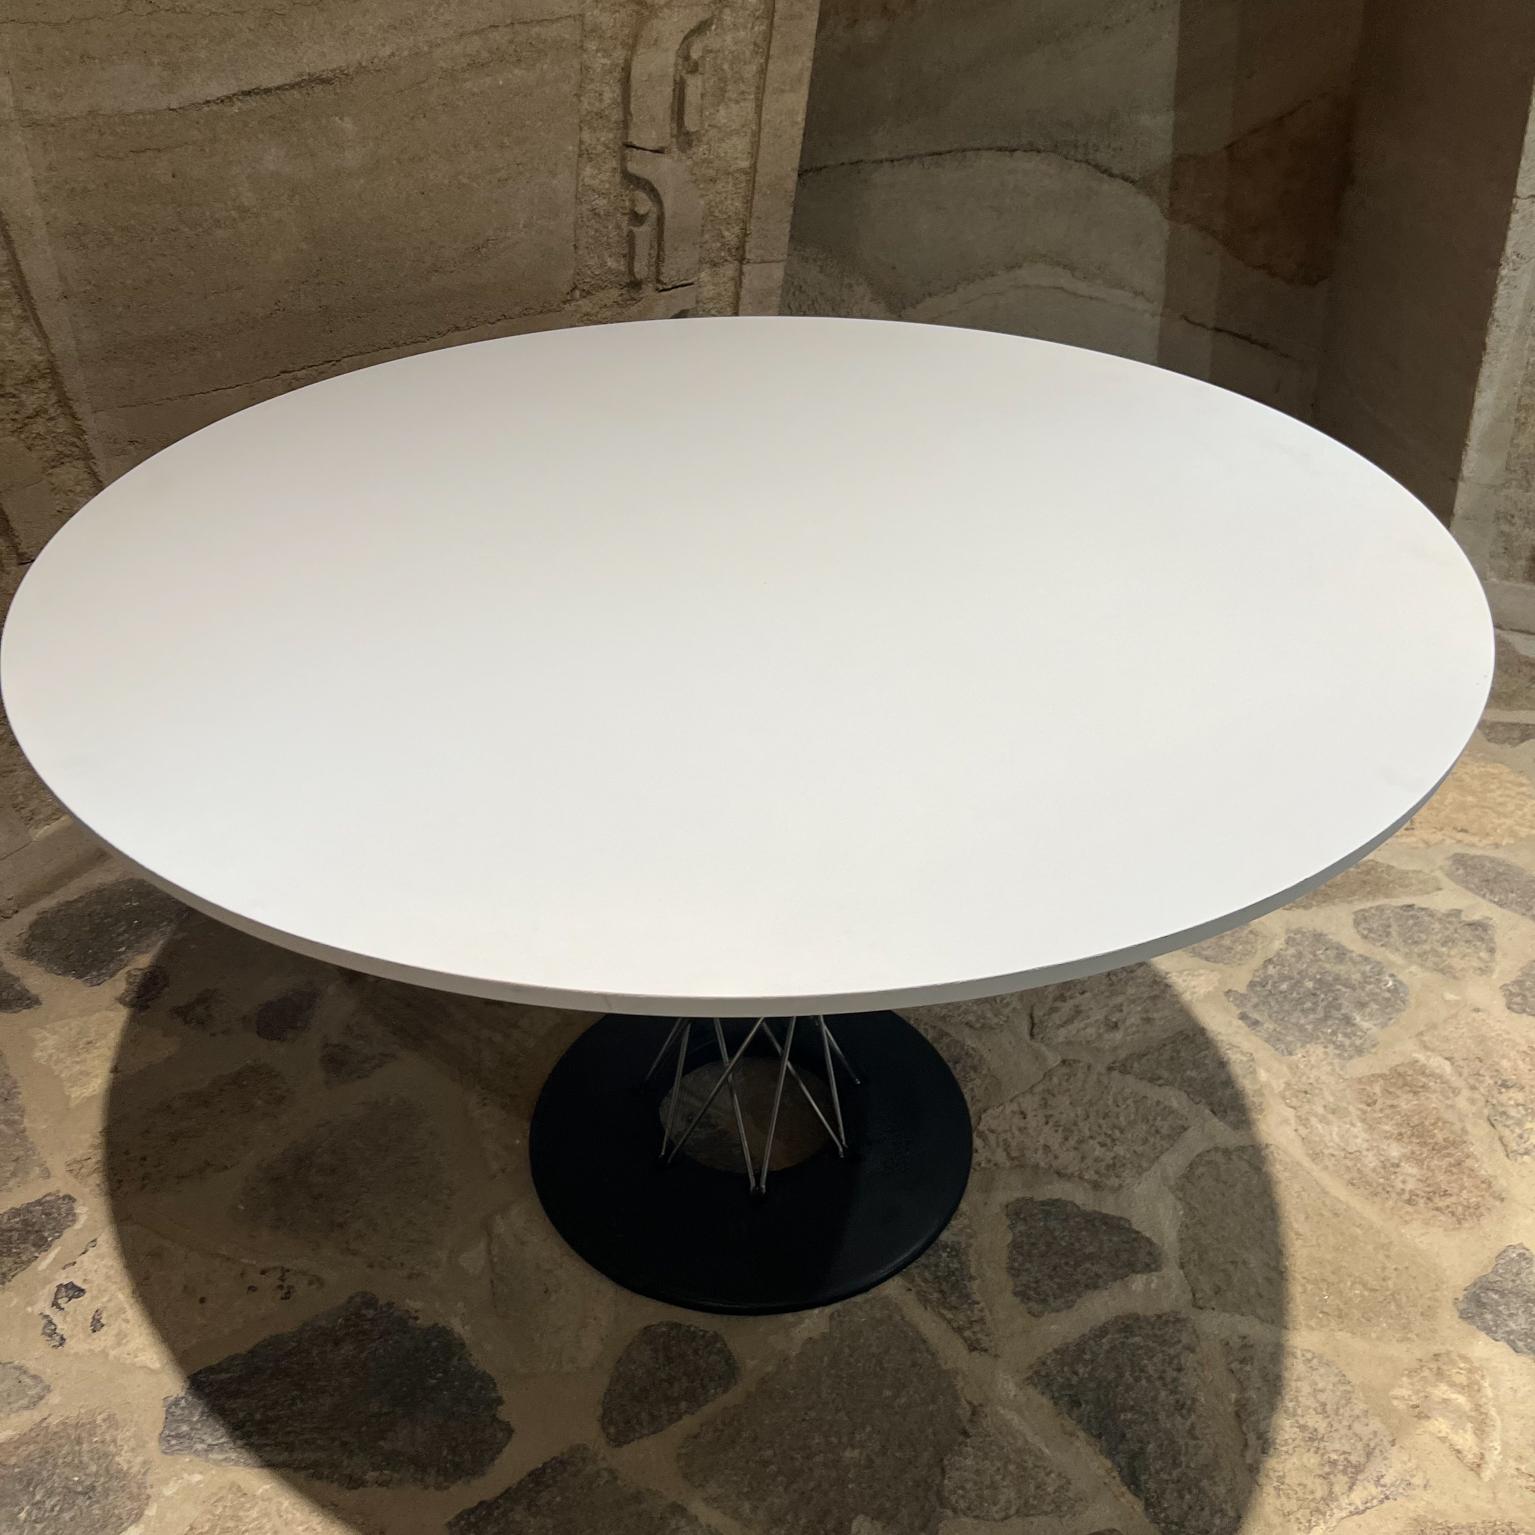 11957 Isamu Noguchi for Knoll Original Mod Cyclone Dining Table For Sale 2